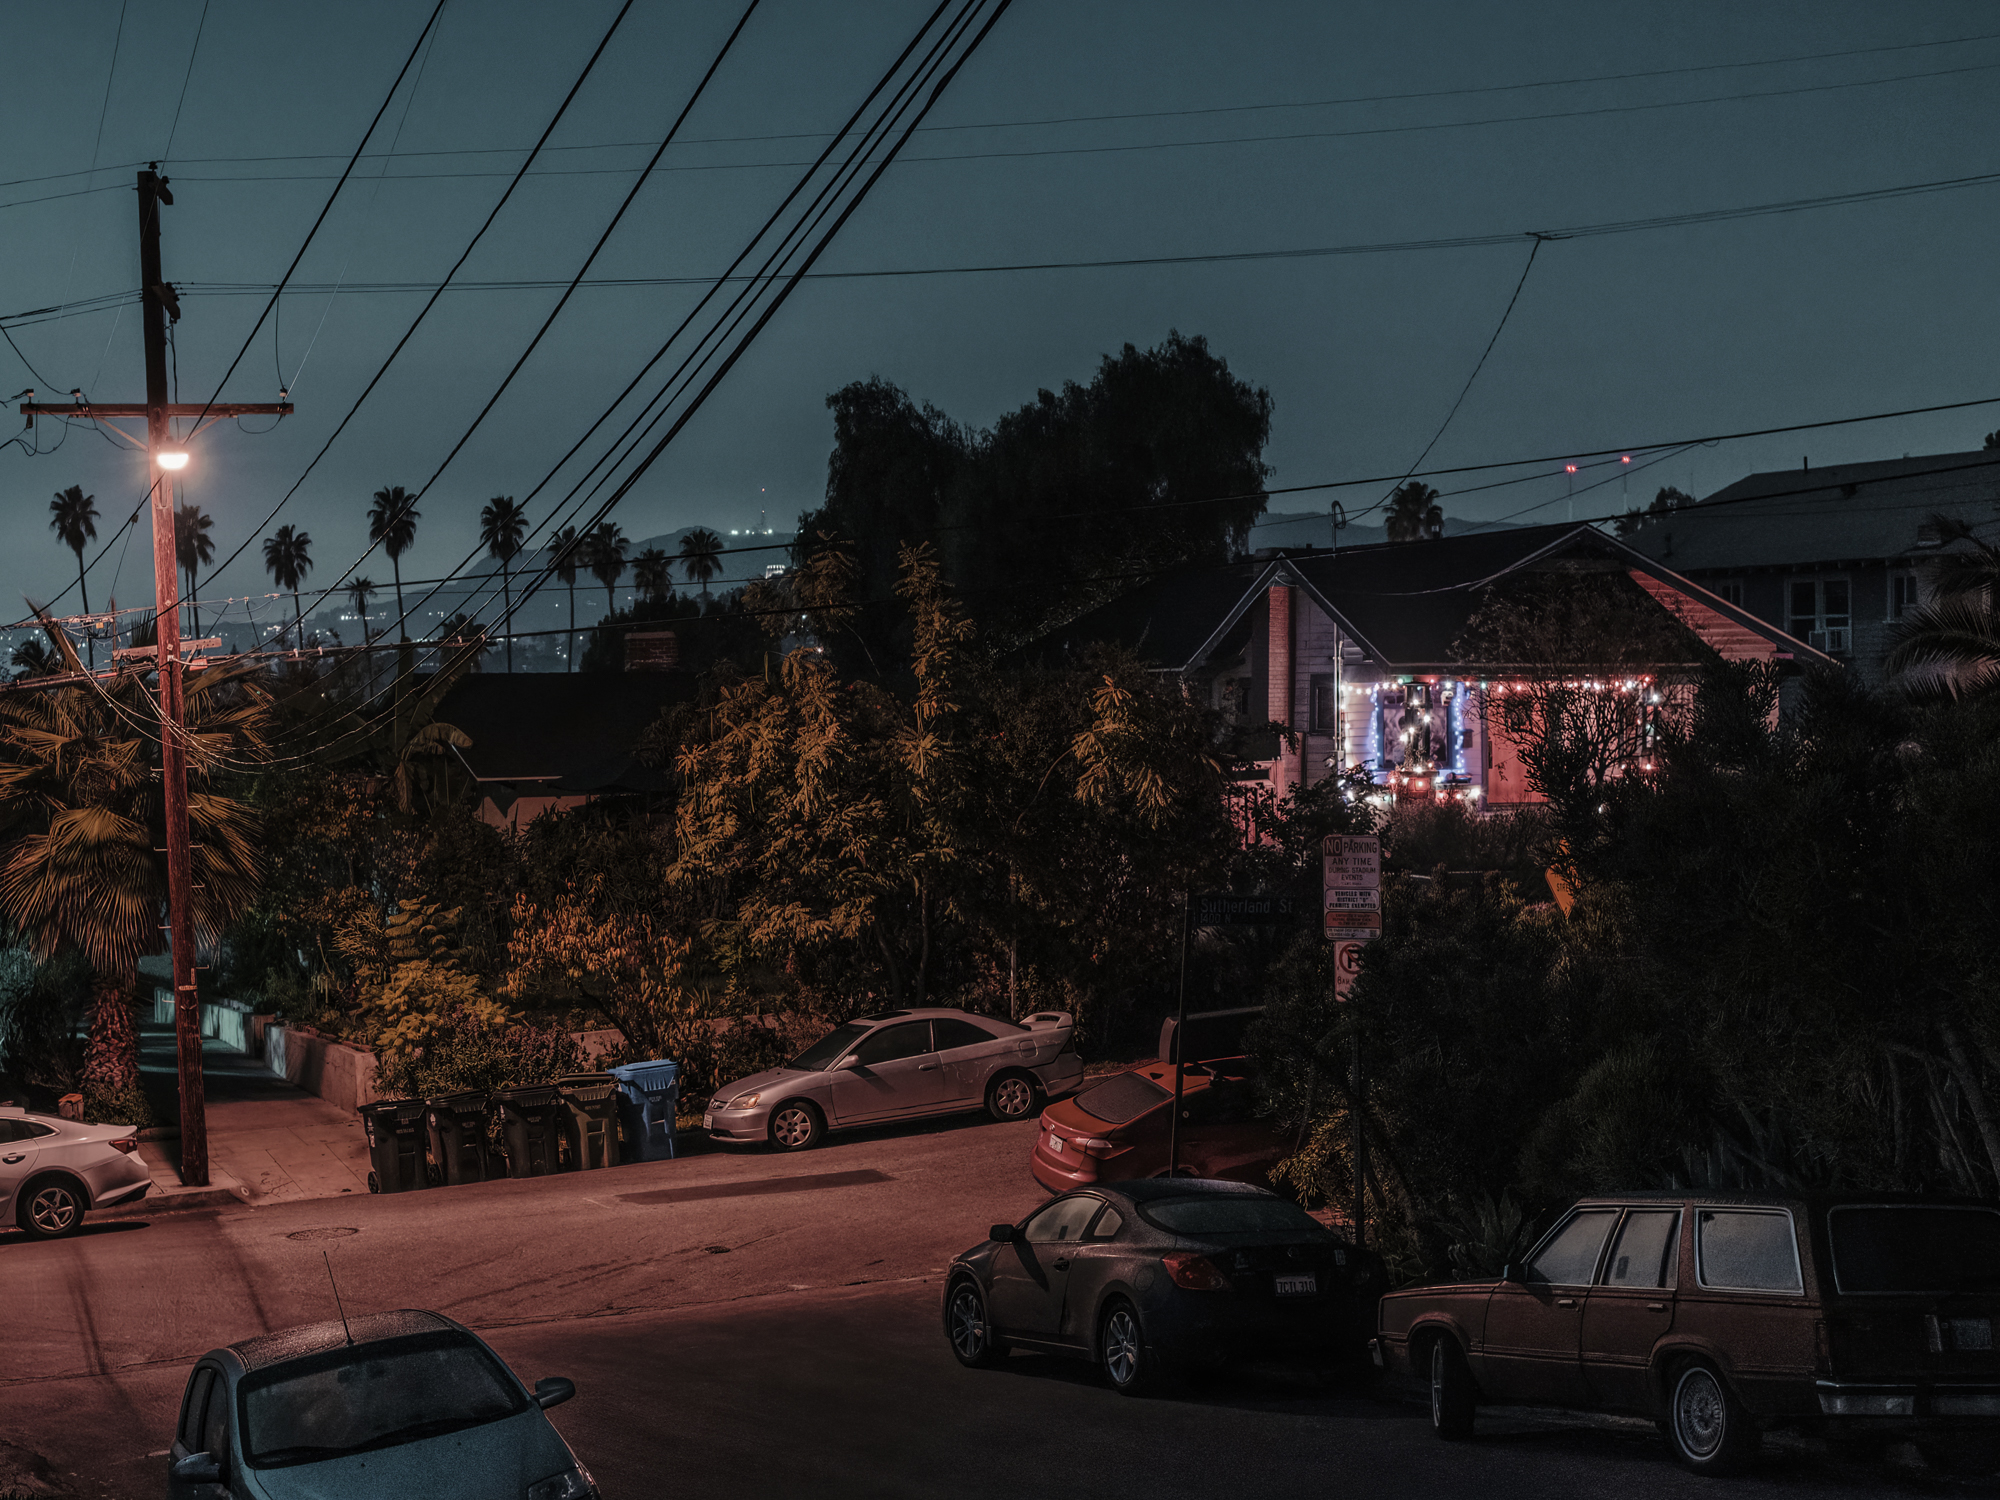    View from MacBeth St. #3, Los Angeles, 2018   .  Archival Pigment Print.  30” x 40” - Limited Edition of 2 | 24” x 32” - Limited Edition of 3 | 18” x 24” - Limited Edition of 5  Pricing &amp; Purchase Info:  Leon   Gallery  